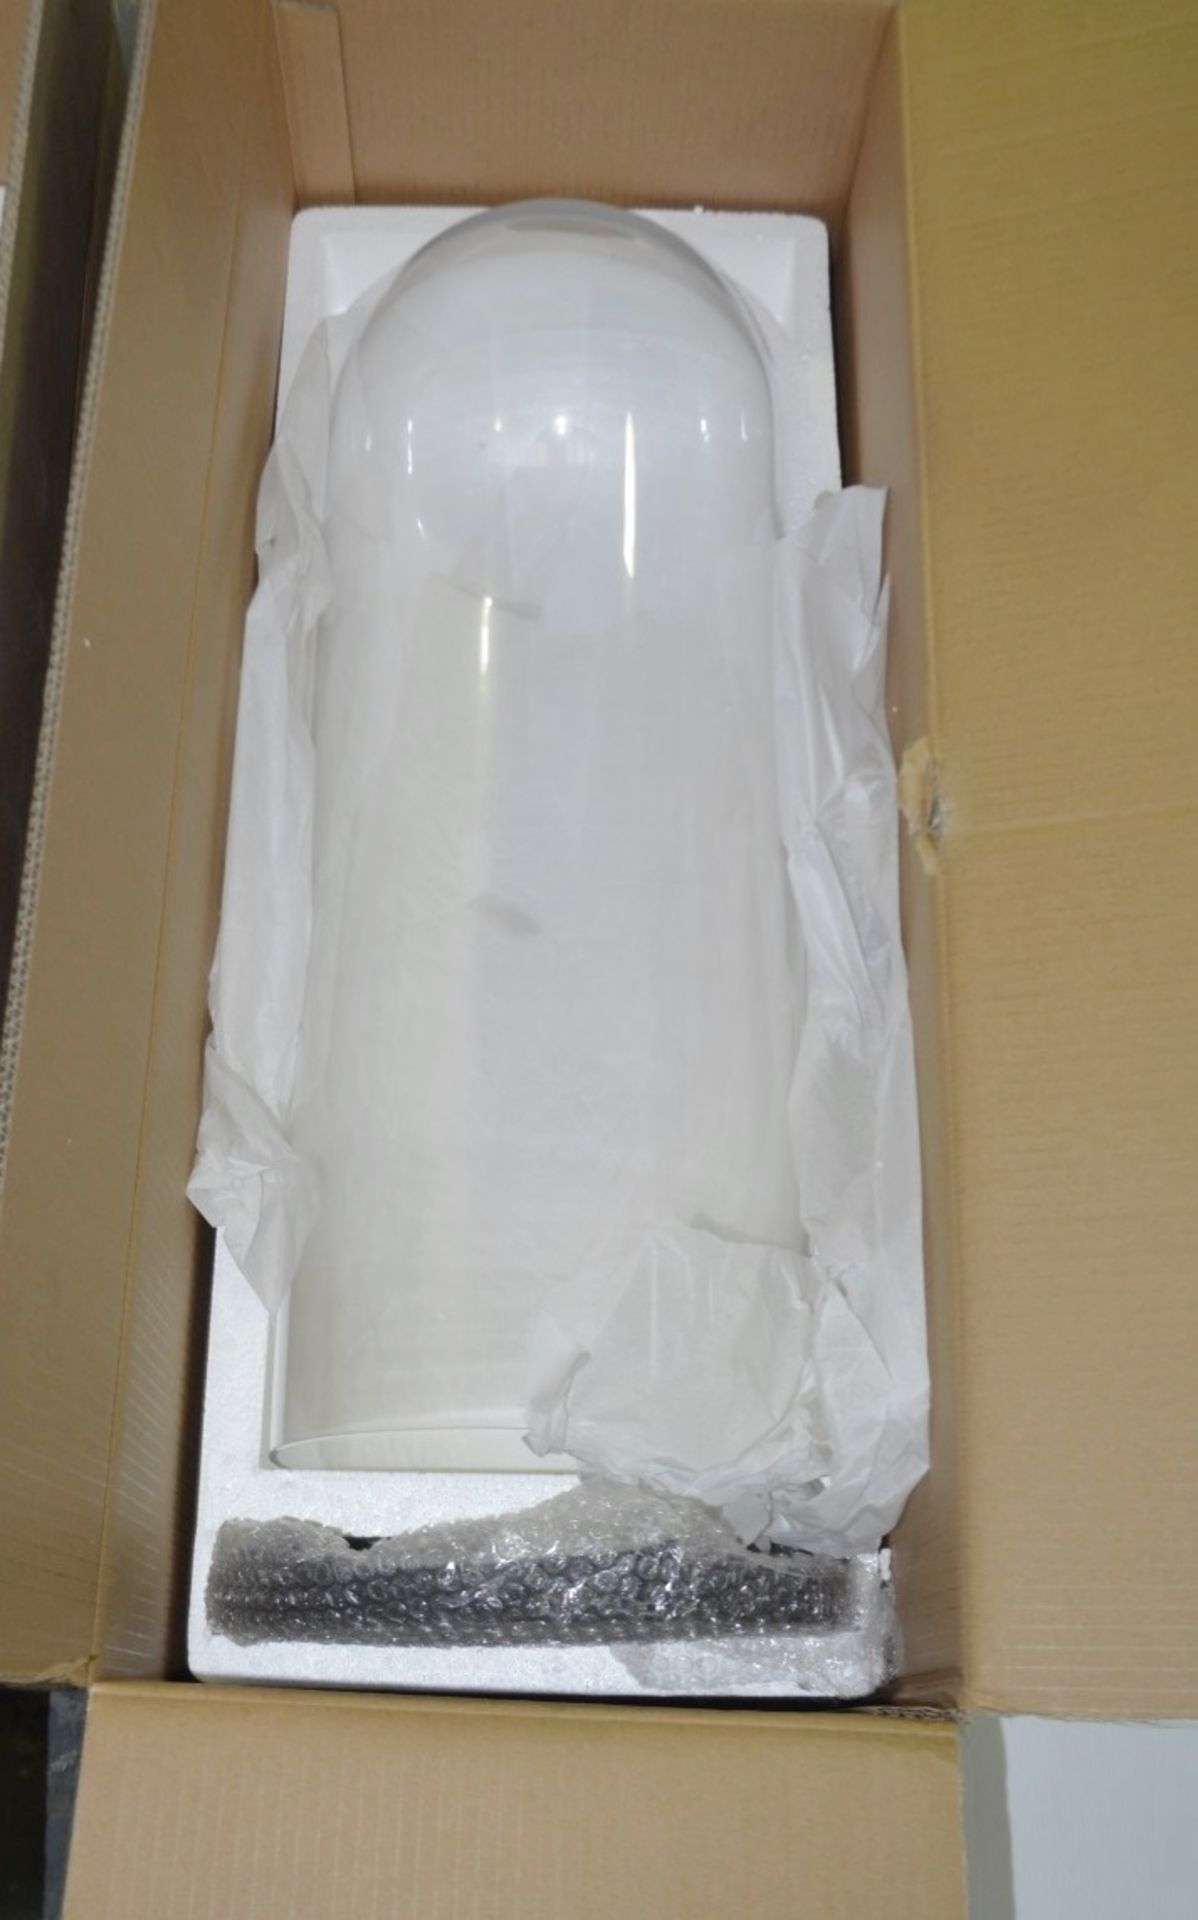 1 x EICHHOLTZ 'Palermo' Large Clear Glass Bell Jar With Wooden Base In Black - Unused Boxed - Image 2 of 3